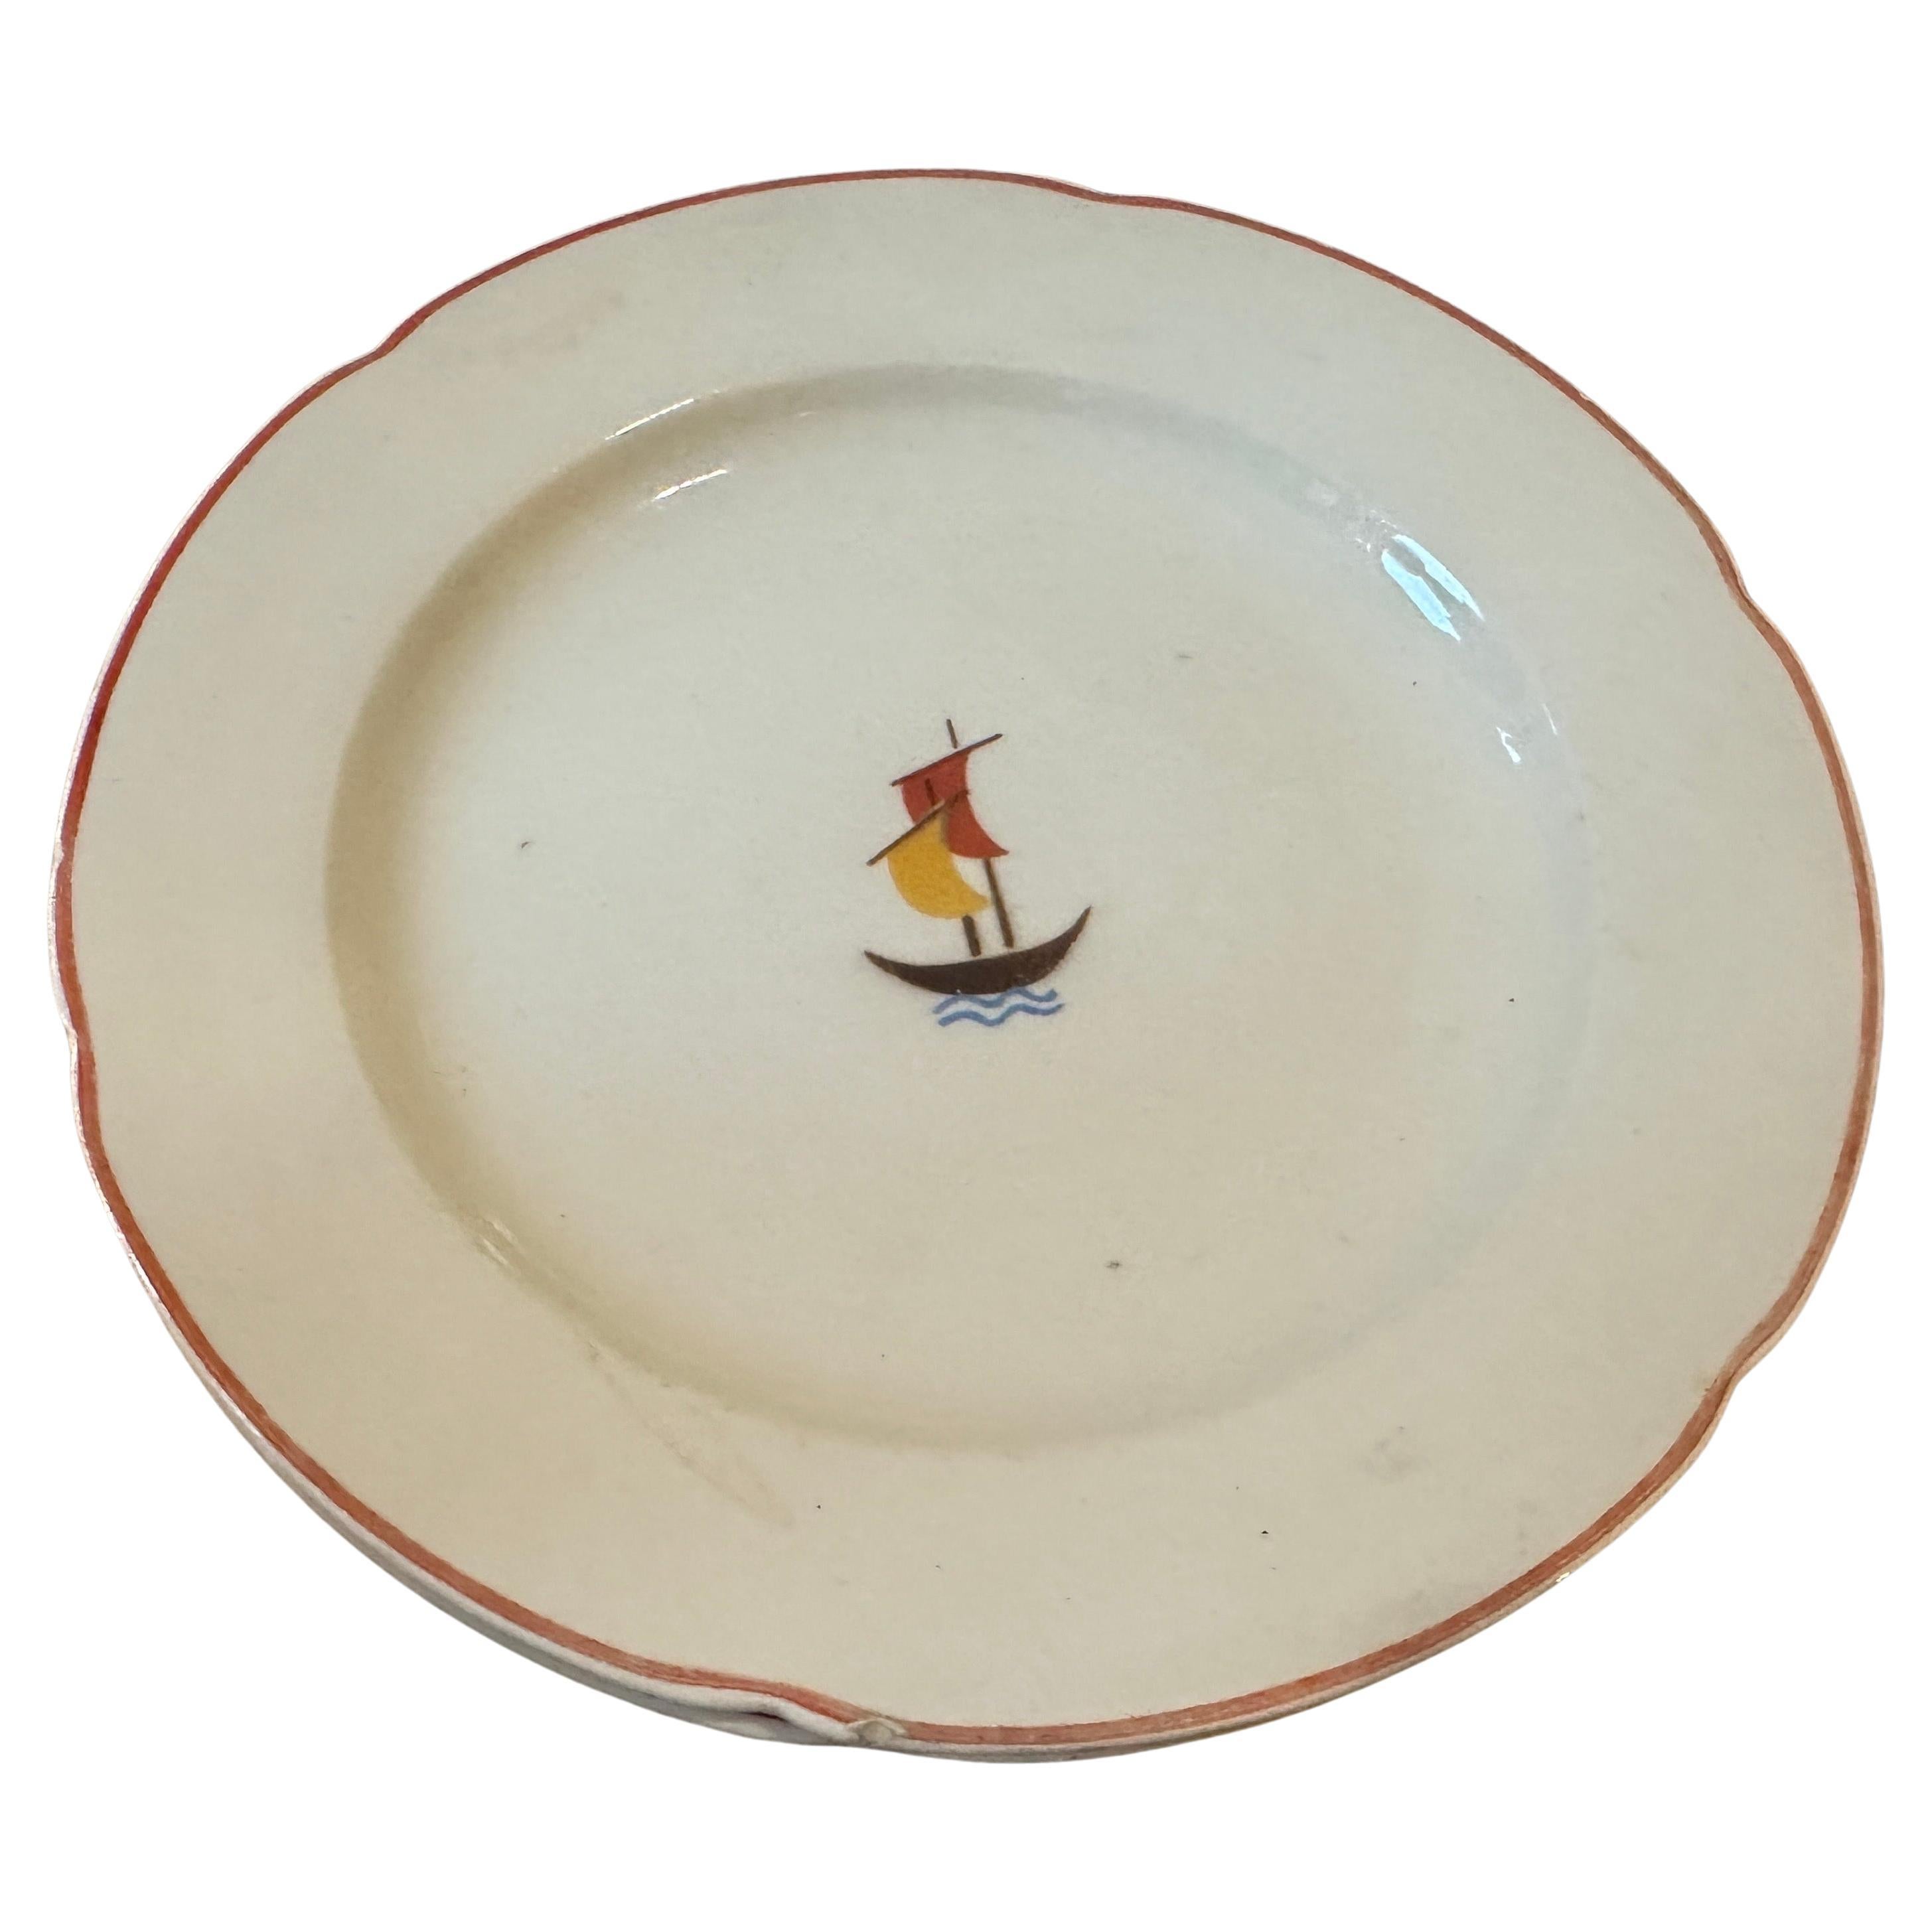 An art deco cake service designed by Gio Ponti in the Thirties and manufactured in Italy by S. C. Richard. The service is composed by 8 pieces, 1 cake plate, 6 small plates diameter cm 20 and on small oval plate.  The decor representing a sail boat